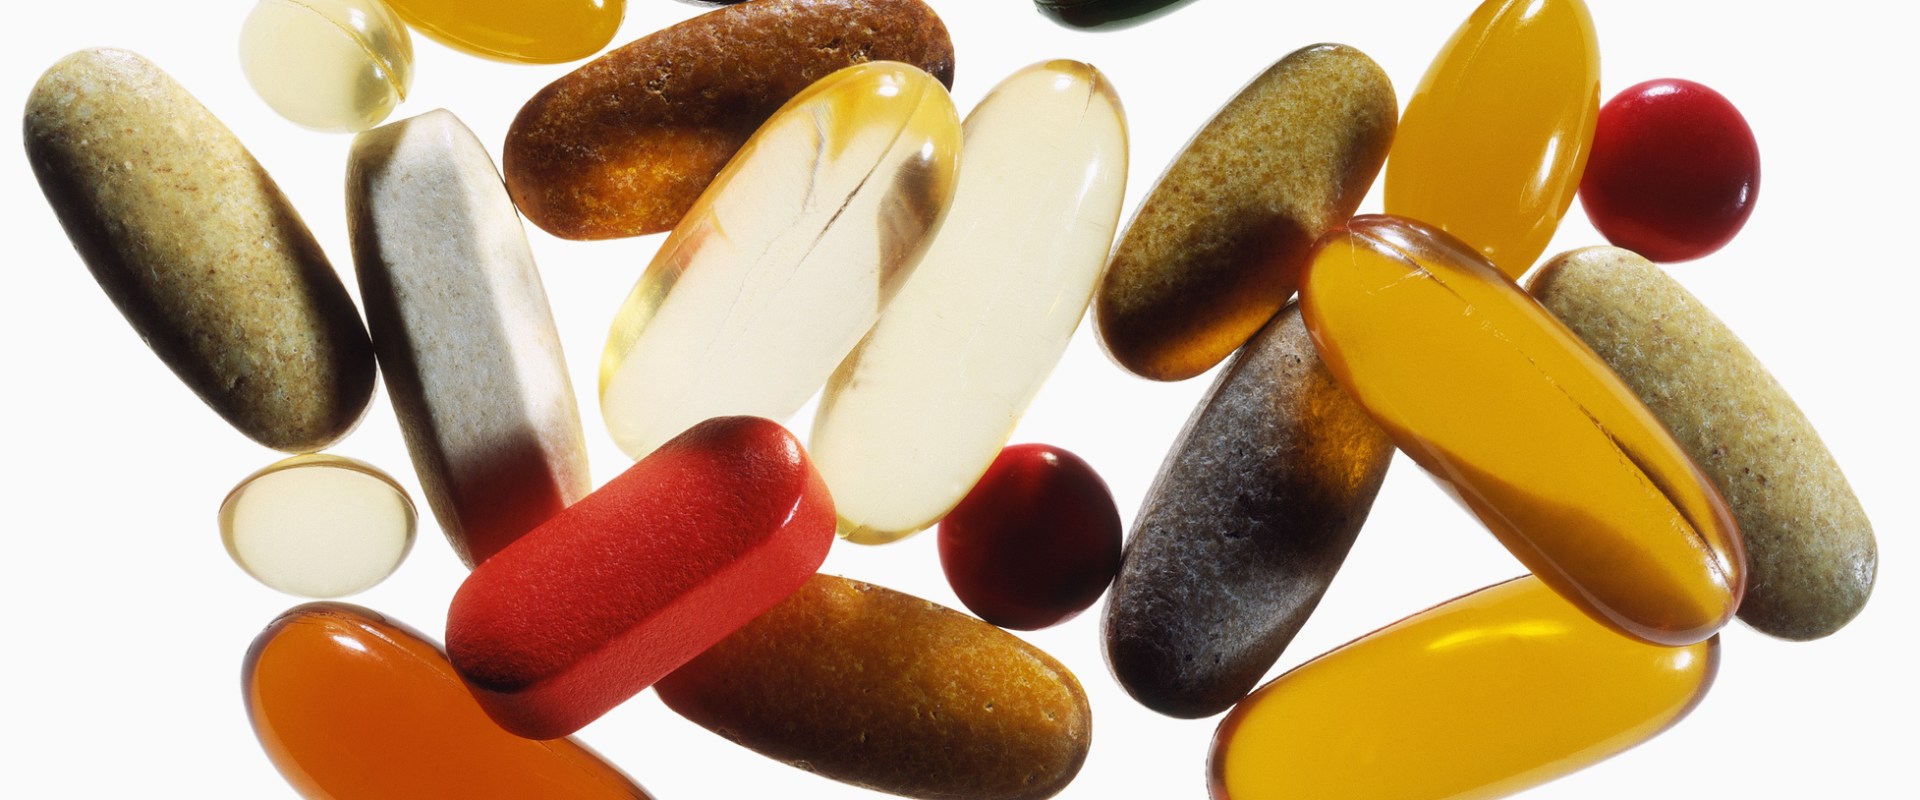 Are Dietary Supplements Safe? An Expert's Perspective